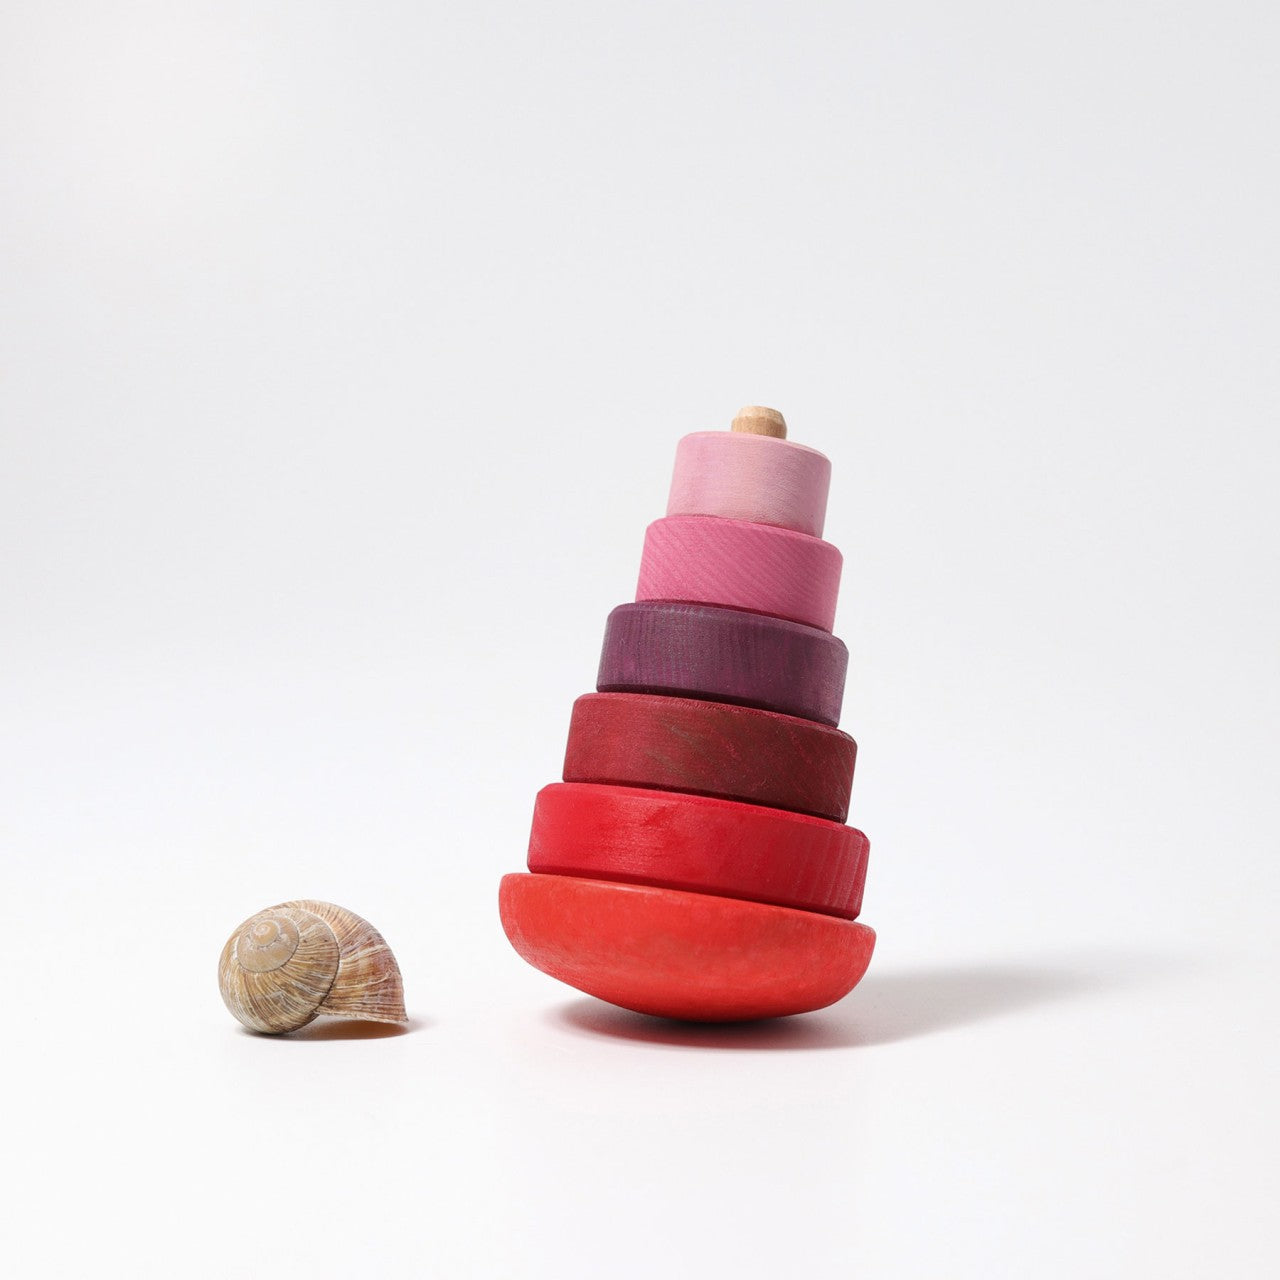 GRIMM'S Wobbly Stacking Tower Pink